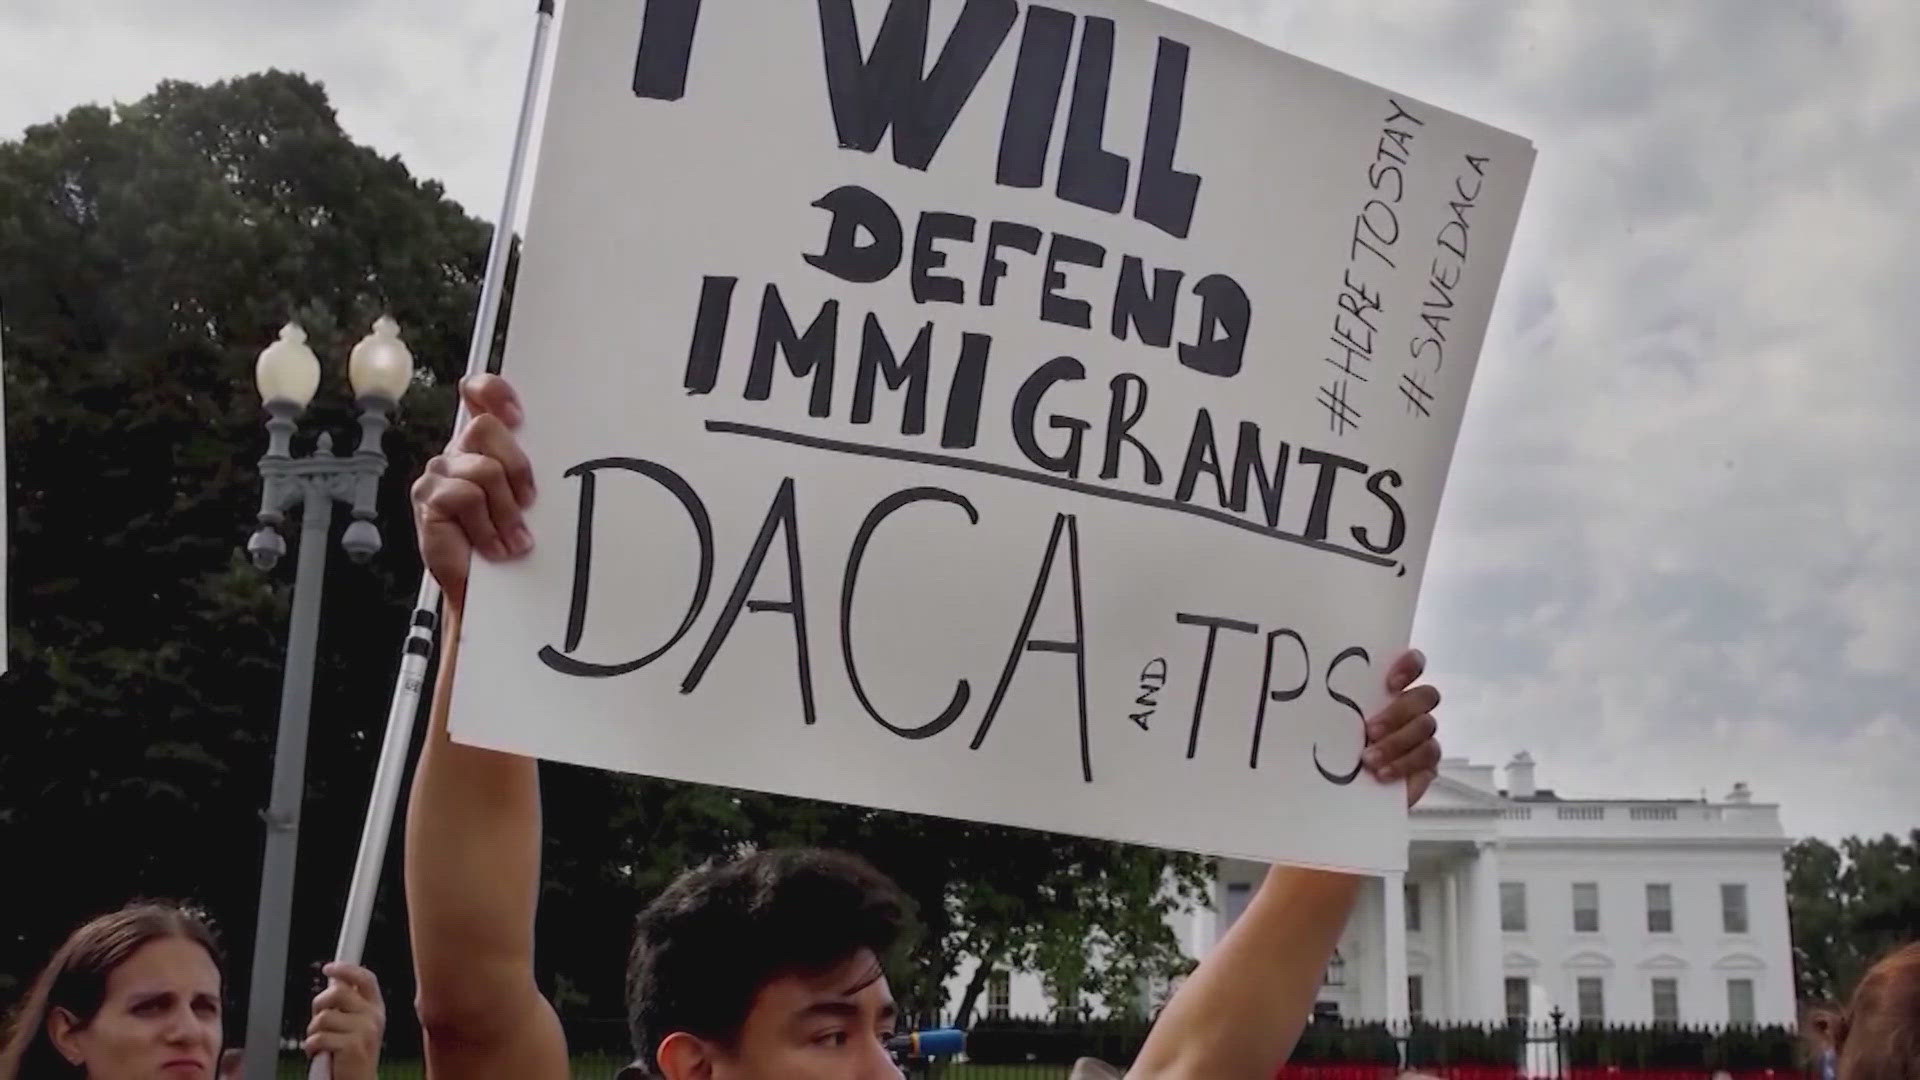 The announcement comes on the 12th anniversary of DACA.